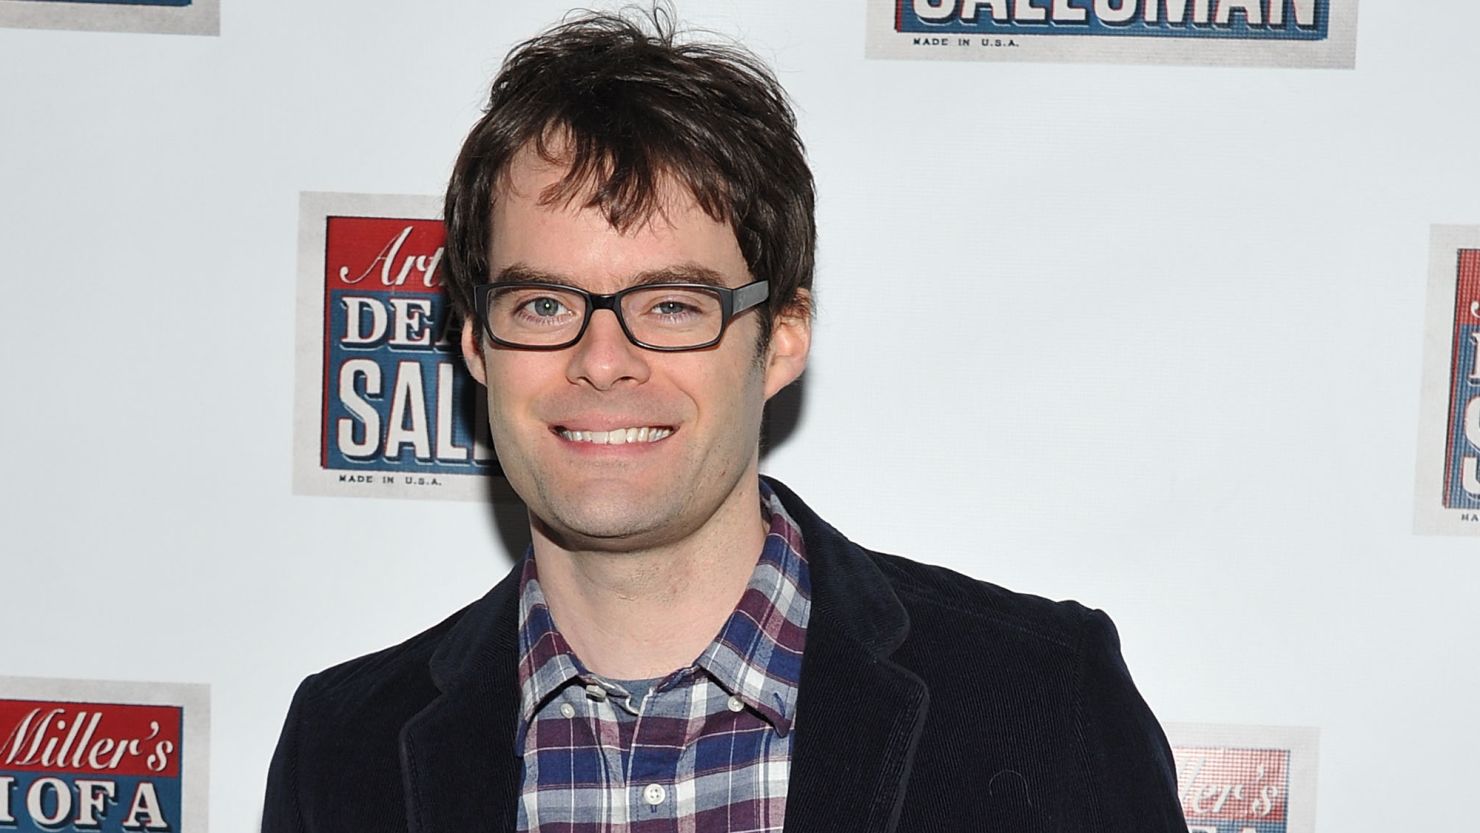 Bill Hader is garnering rave reviews for his performance in the film "The Skeleton Twins." 